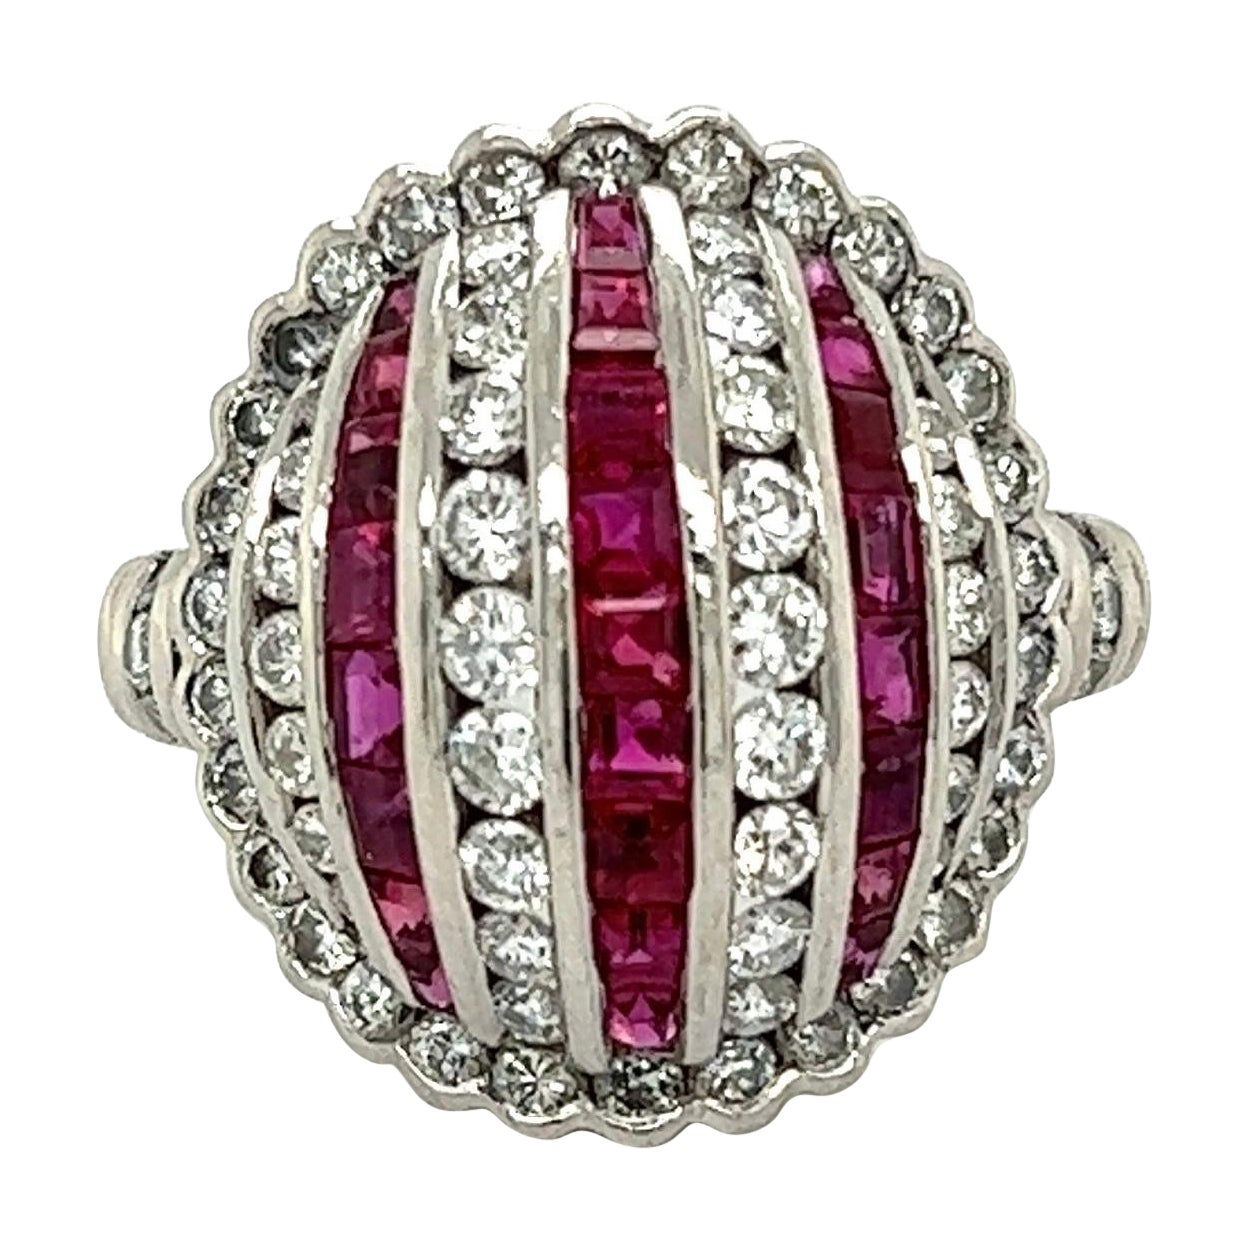 Vintage Diamond and Ruby Platinum Dome Band Ring Estate Fine Jewelry